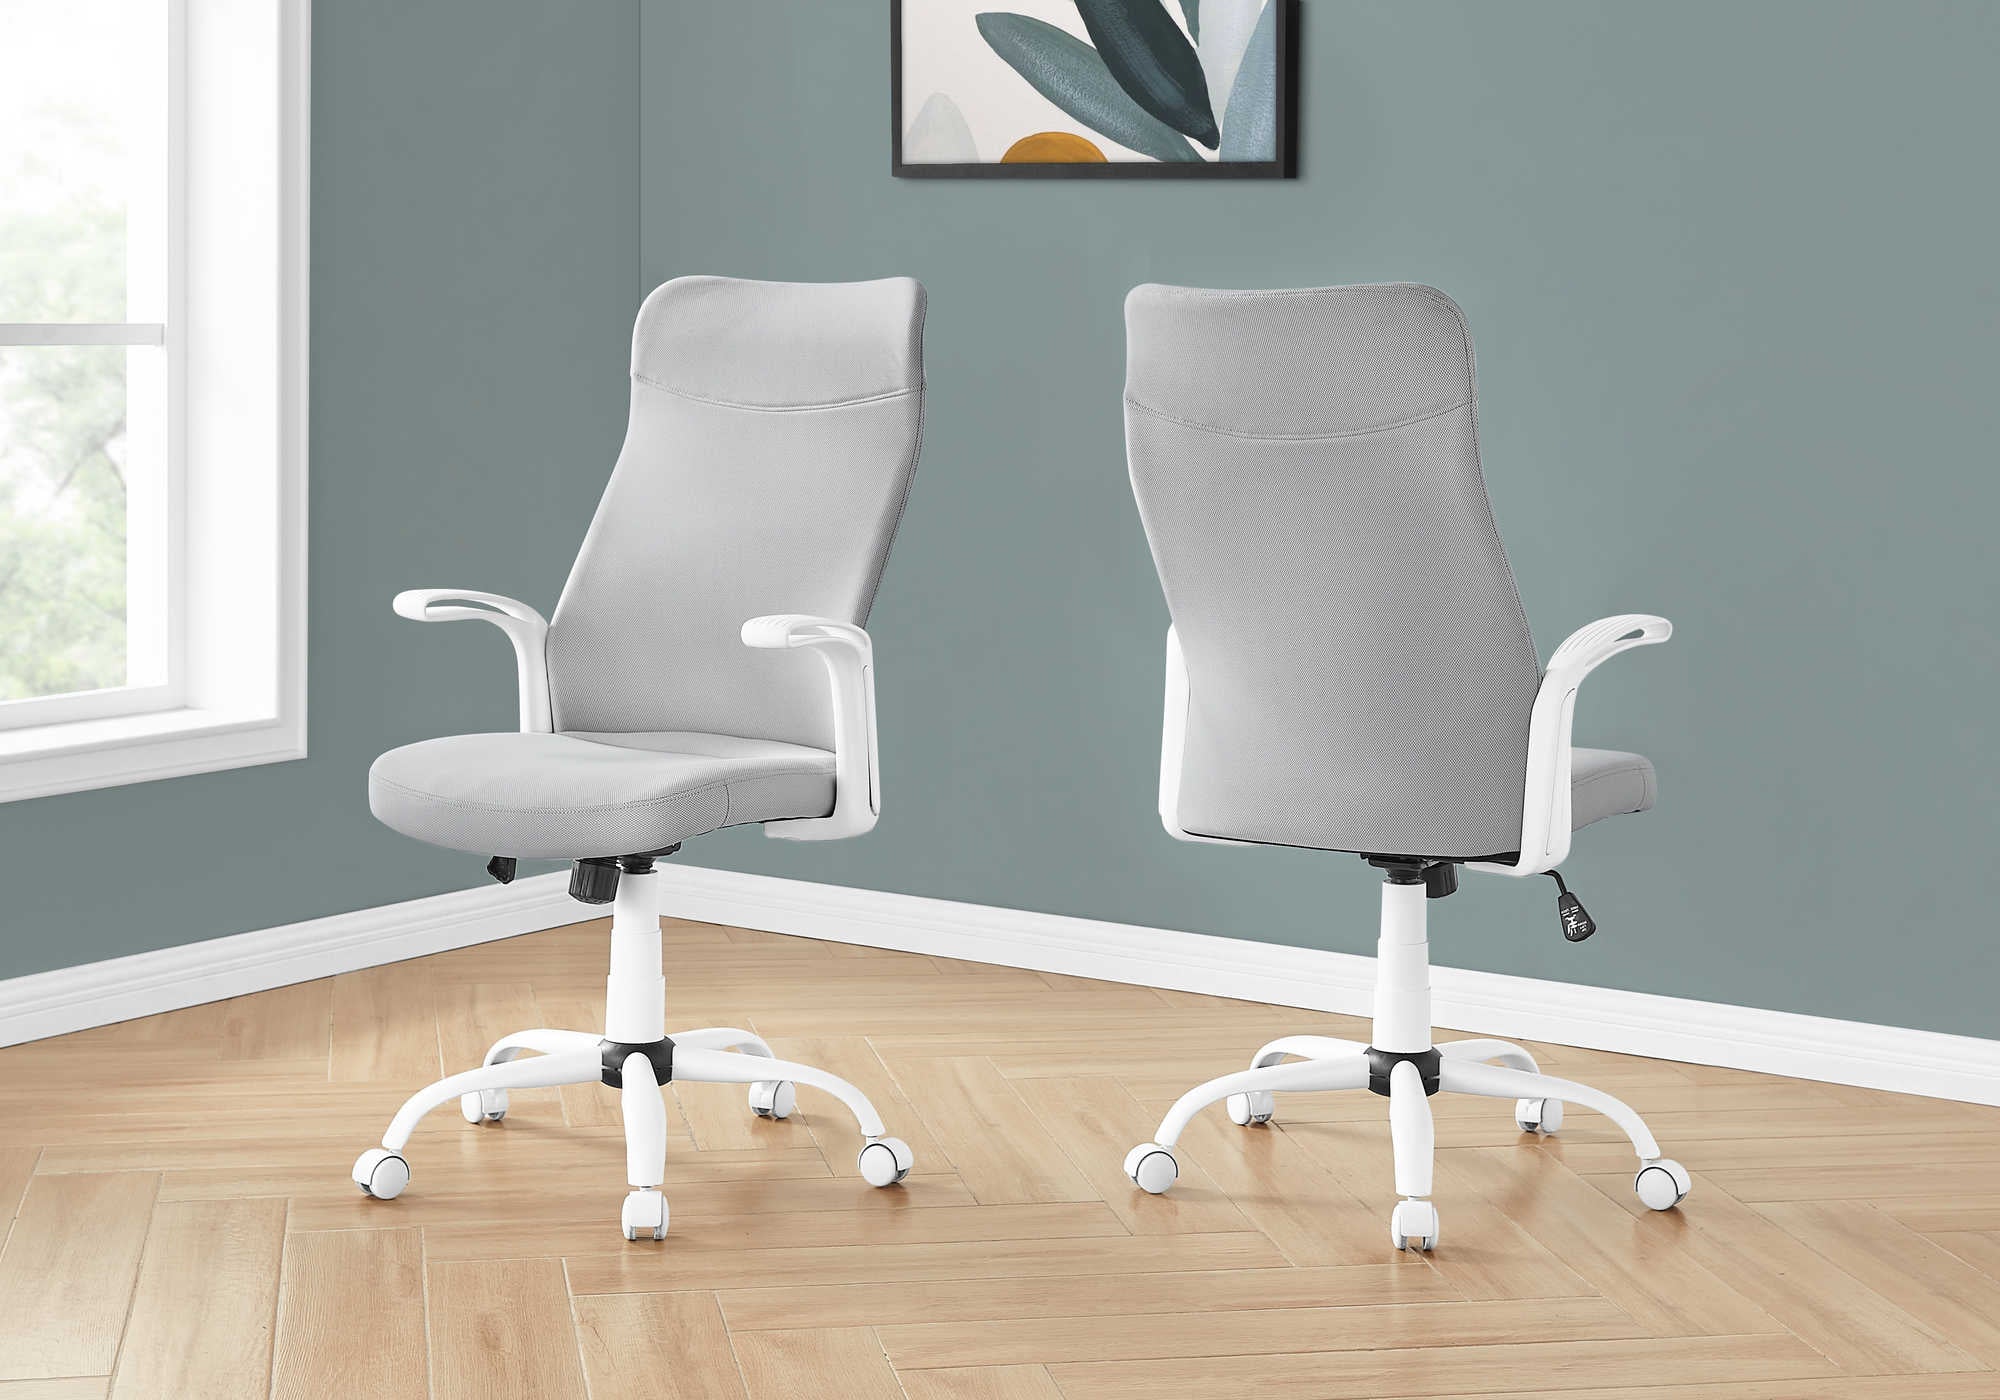 OFFICE CHAIR - WHITE  GREY FABRIC  MULTI POSITION